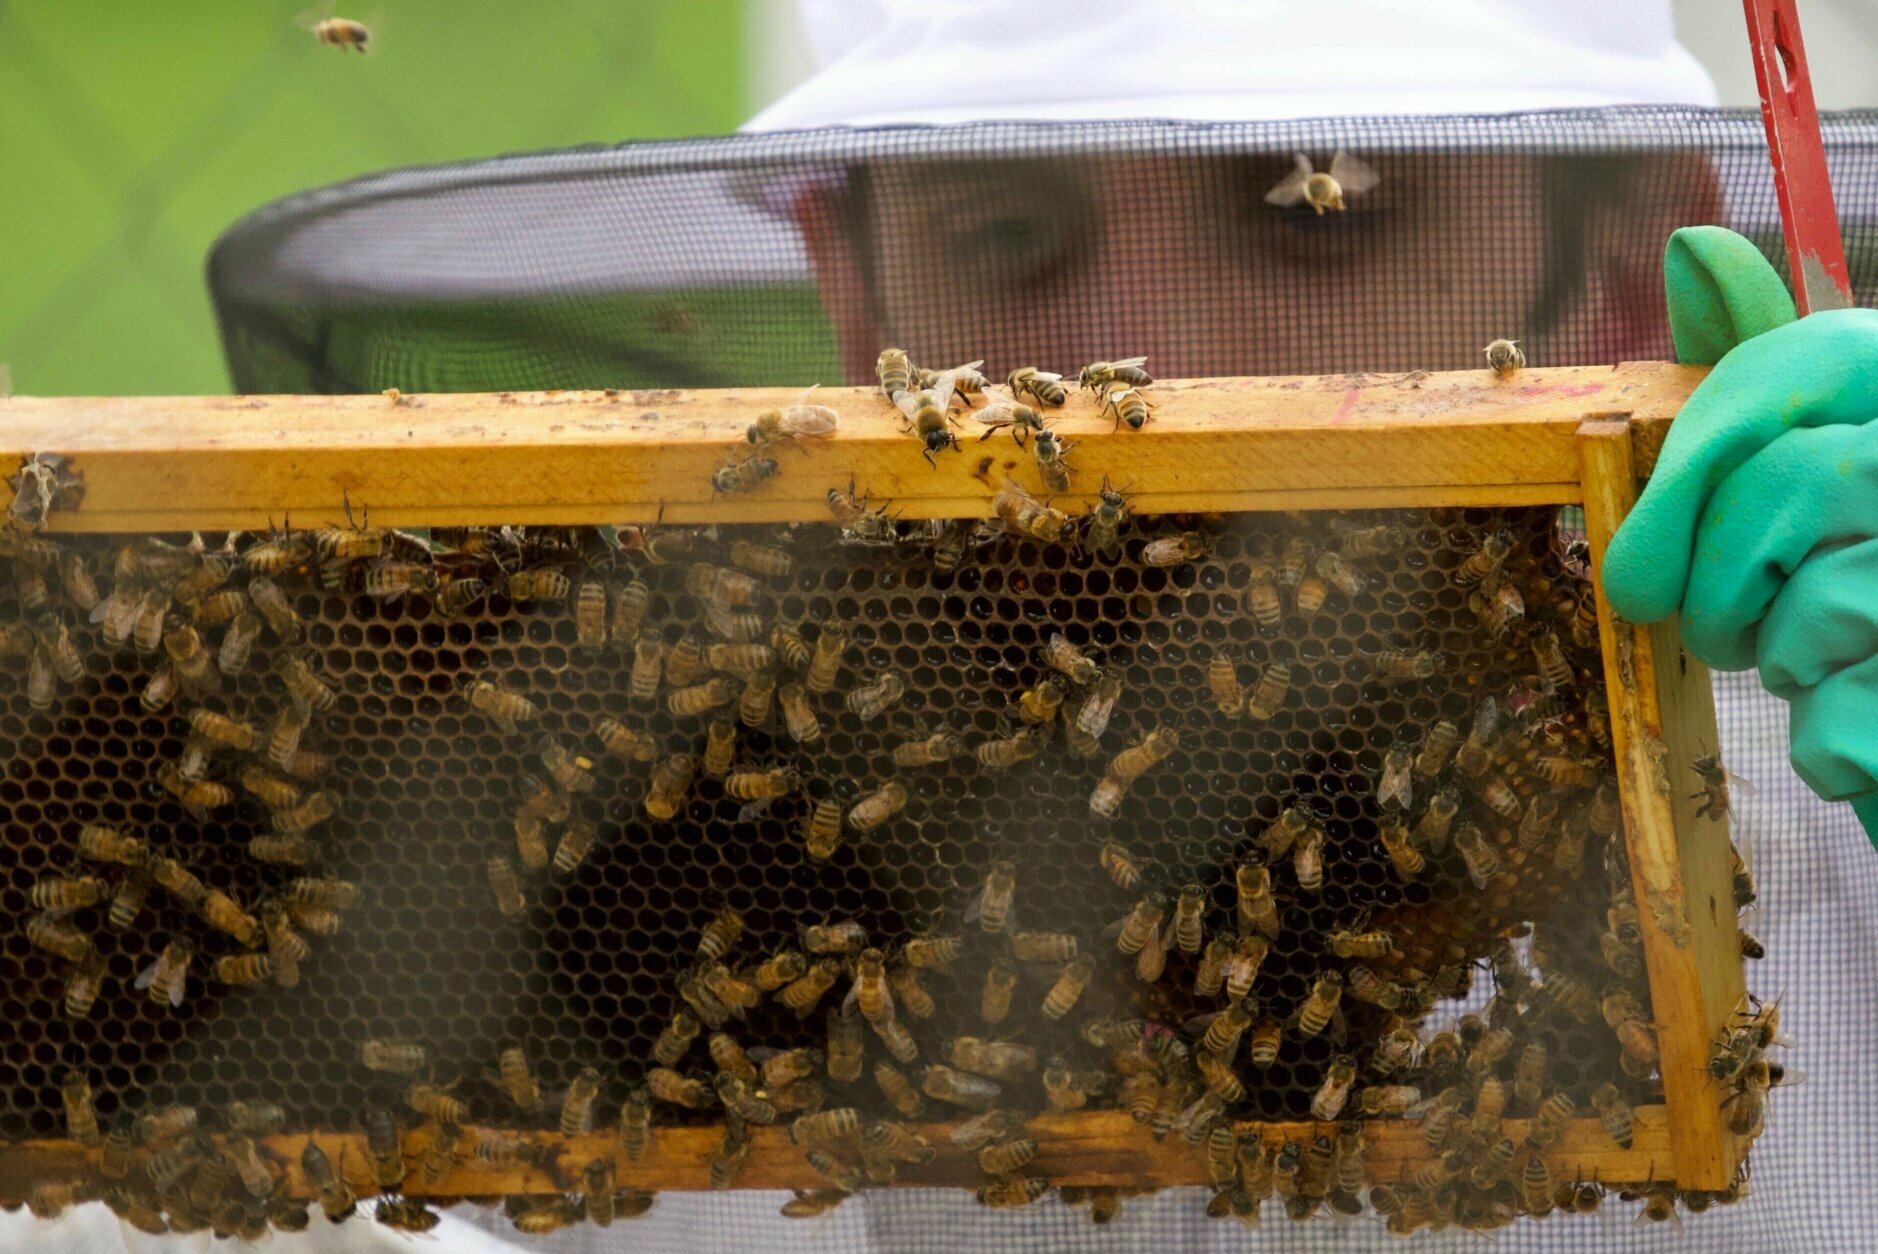 DC resident Bob Alright with bees